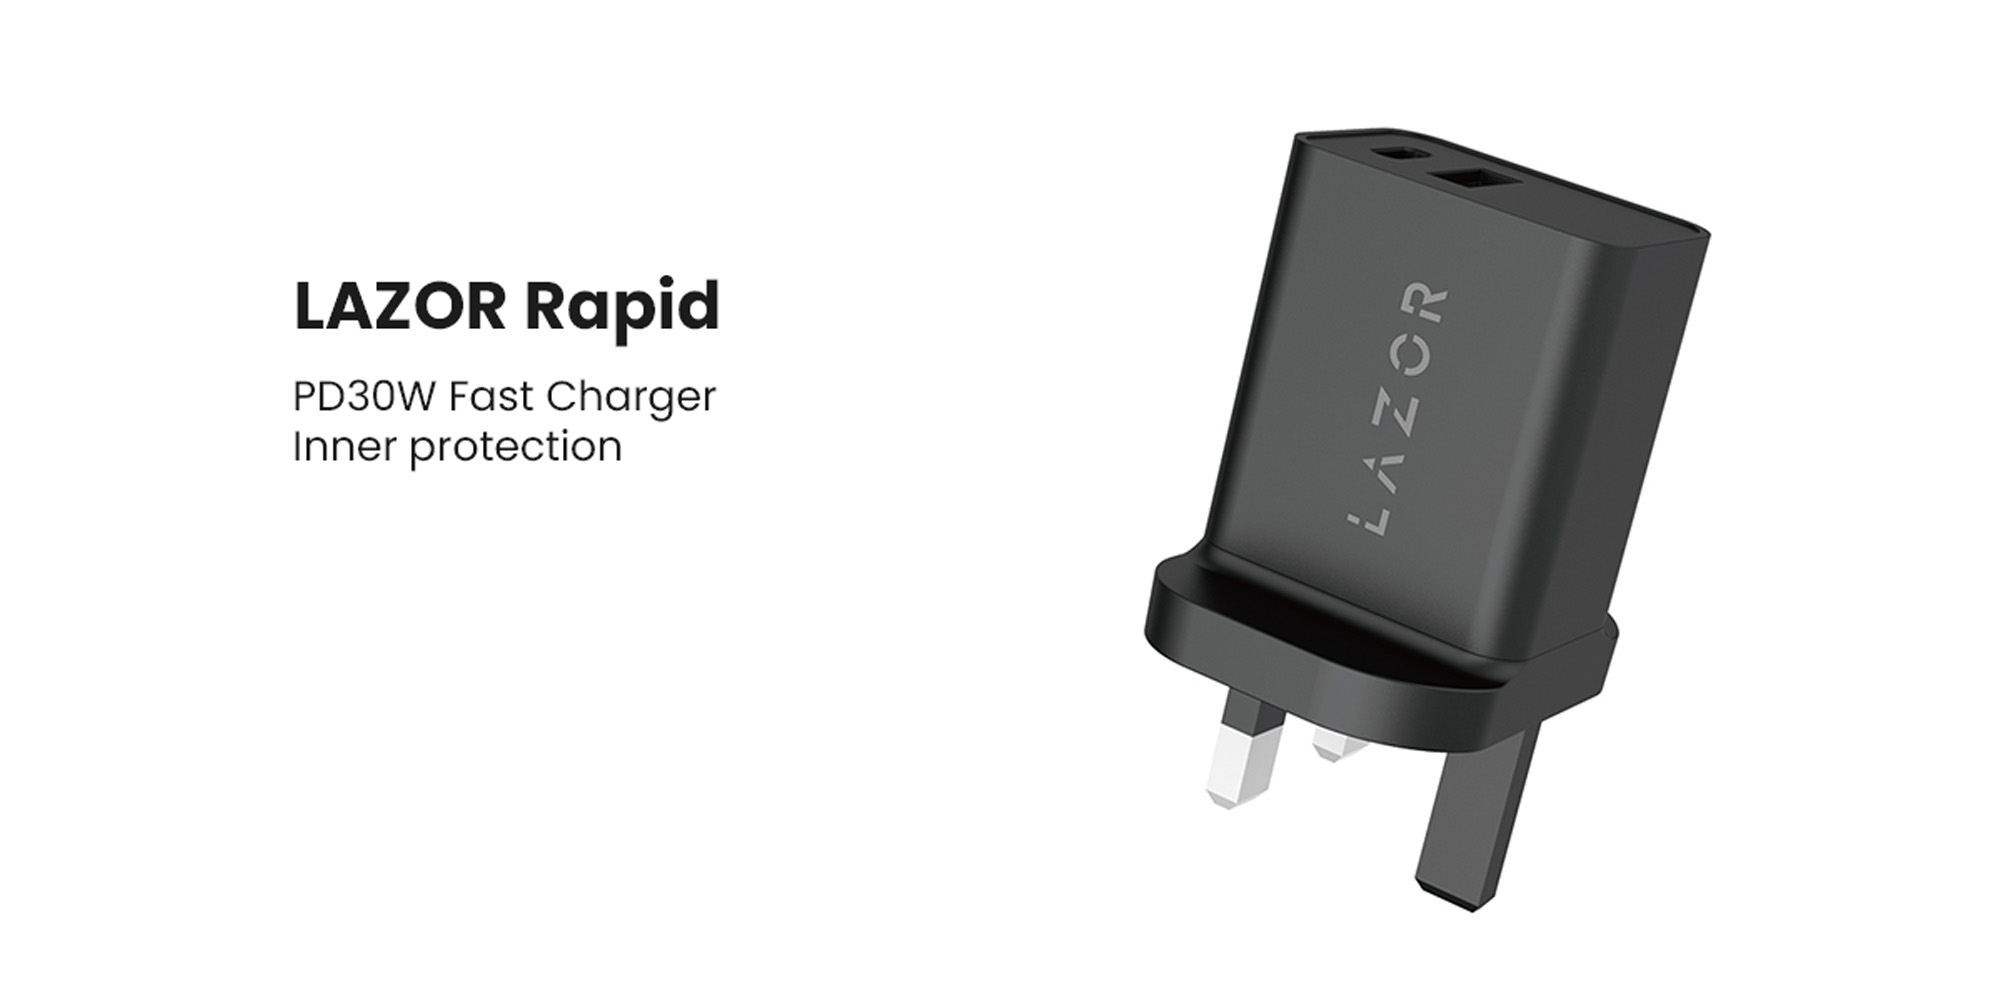 Lazor Rapid AD28: 30W Super Fast Wall Charger with Smart Identification, SCP (Self Charging Protection), PD &amp; QC, Inner Protection, USB &amp; Type-C Output - Black